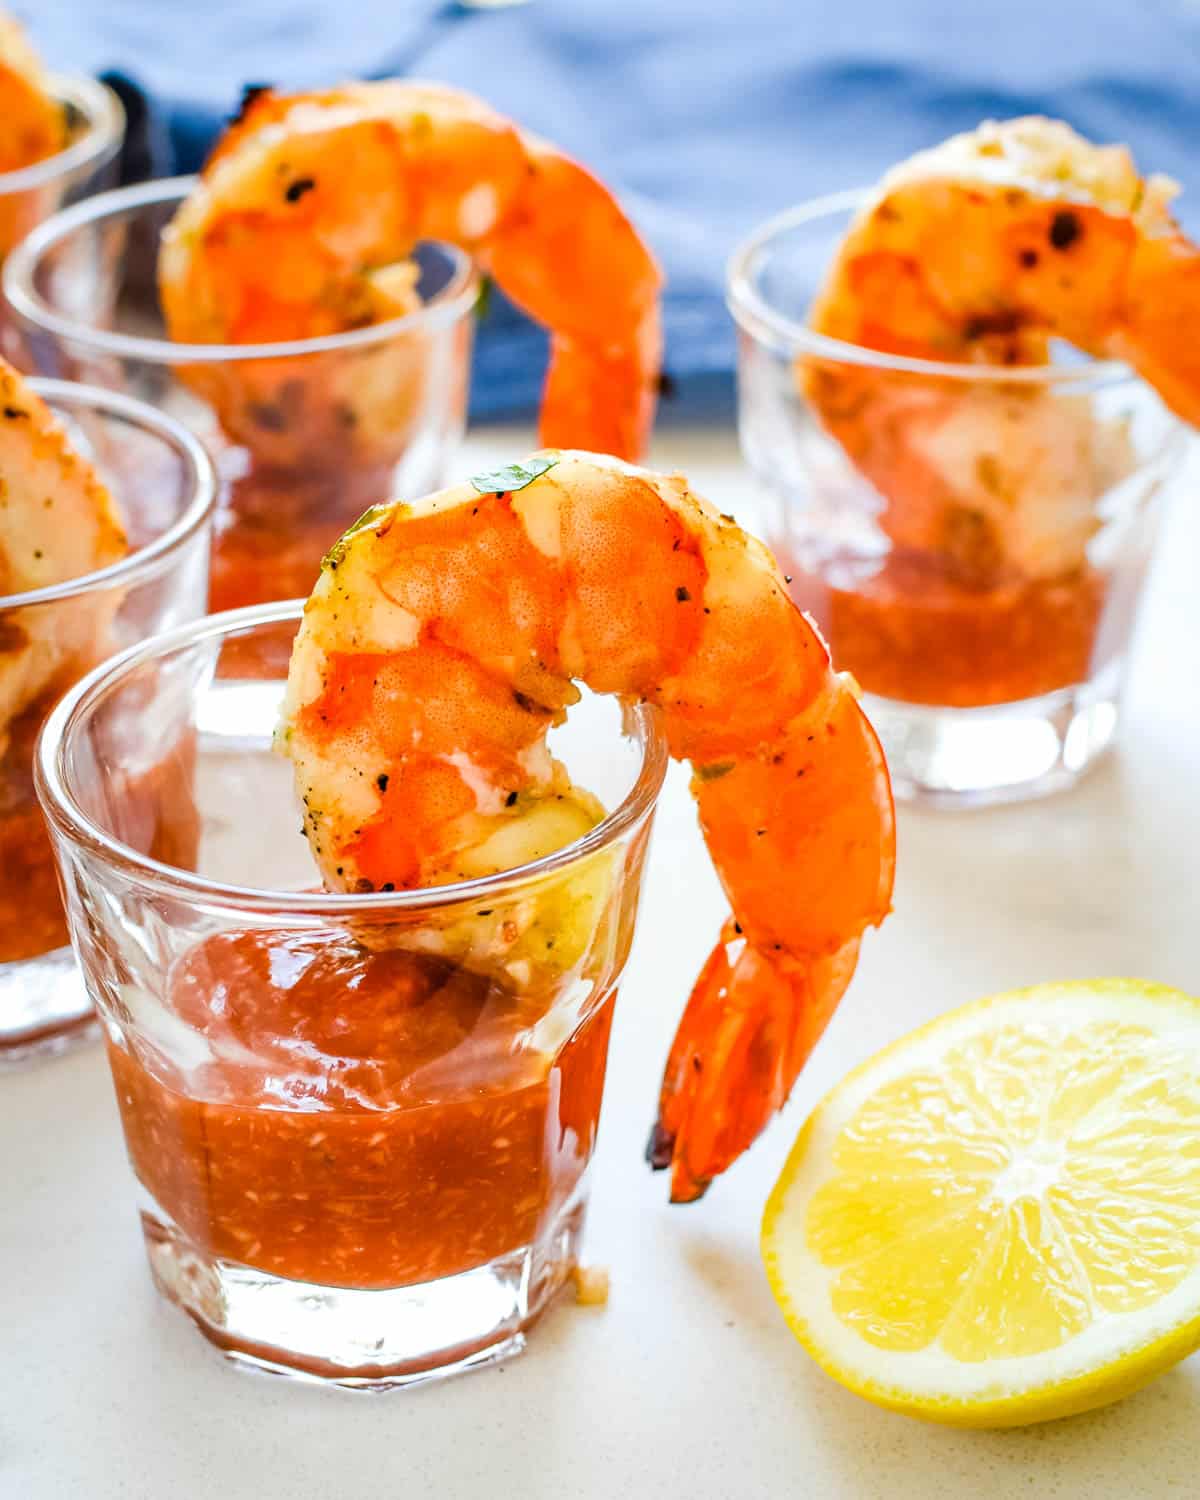 Individual shrimp cocktails with seafood cocktail sauce.